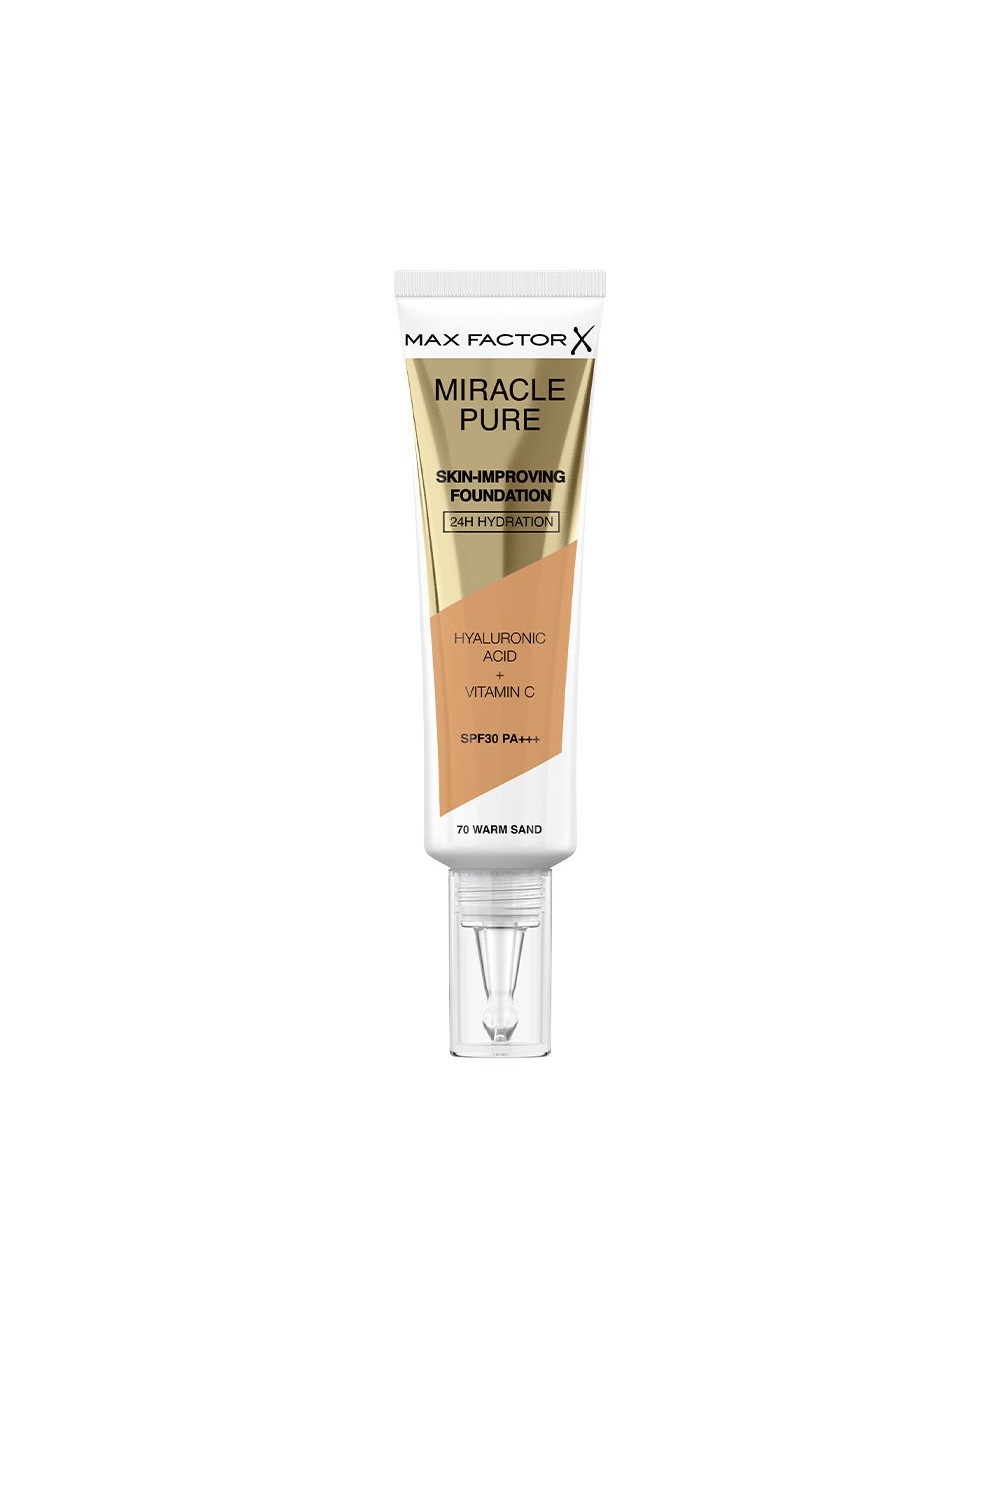 Max Factor Miracle Pure Foundation Spf30 70-Warm Sand